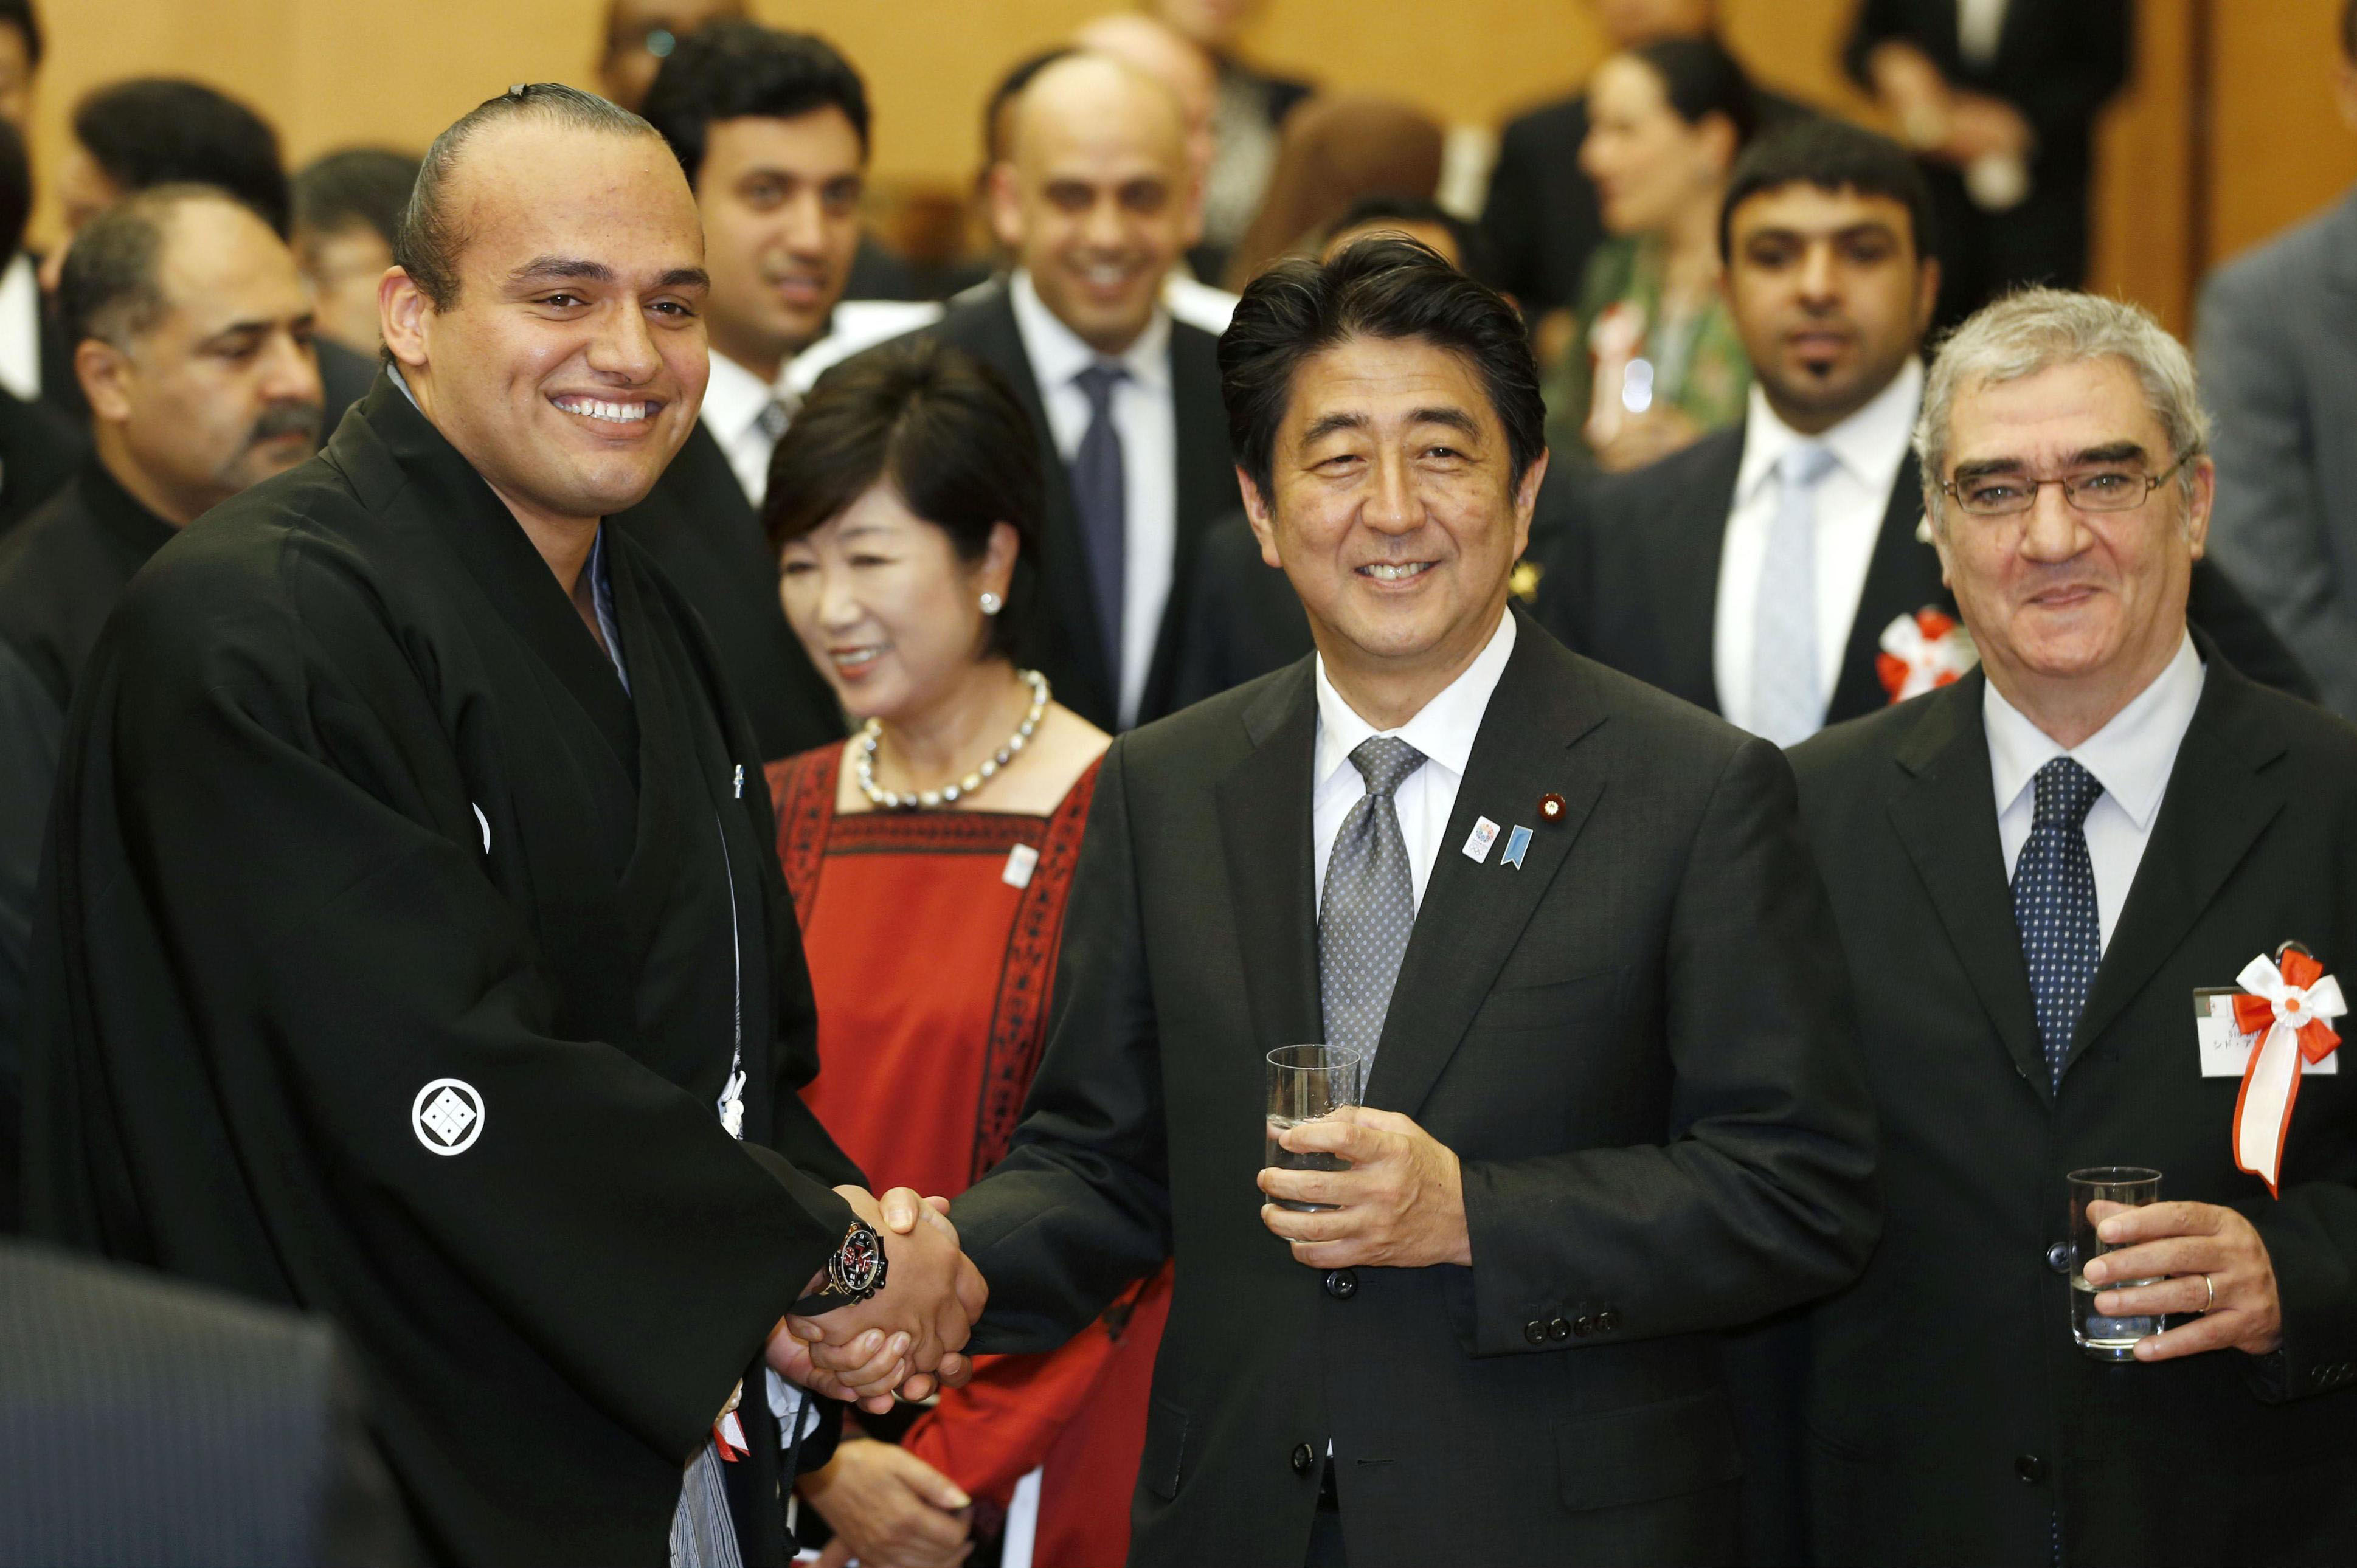 Fast friends: Prime Minister Shinzo Abe poses with sumo wrestler Osunaarashi, the first sekitori from Africa, during an 'iftar' dinner party at the prime minister's office Wednesday. | KYODO